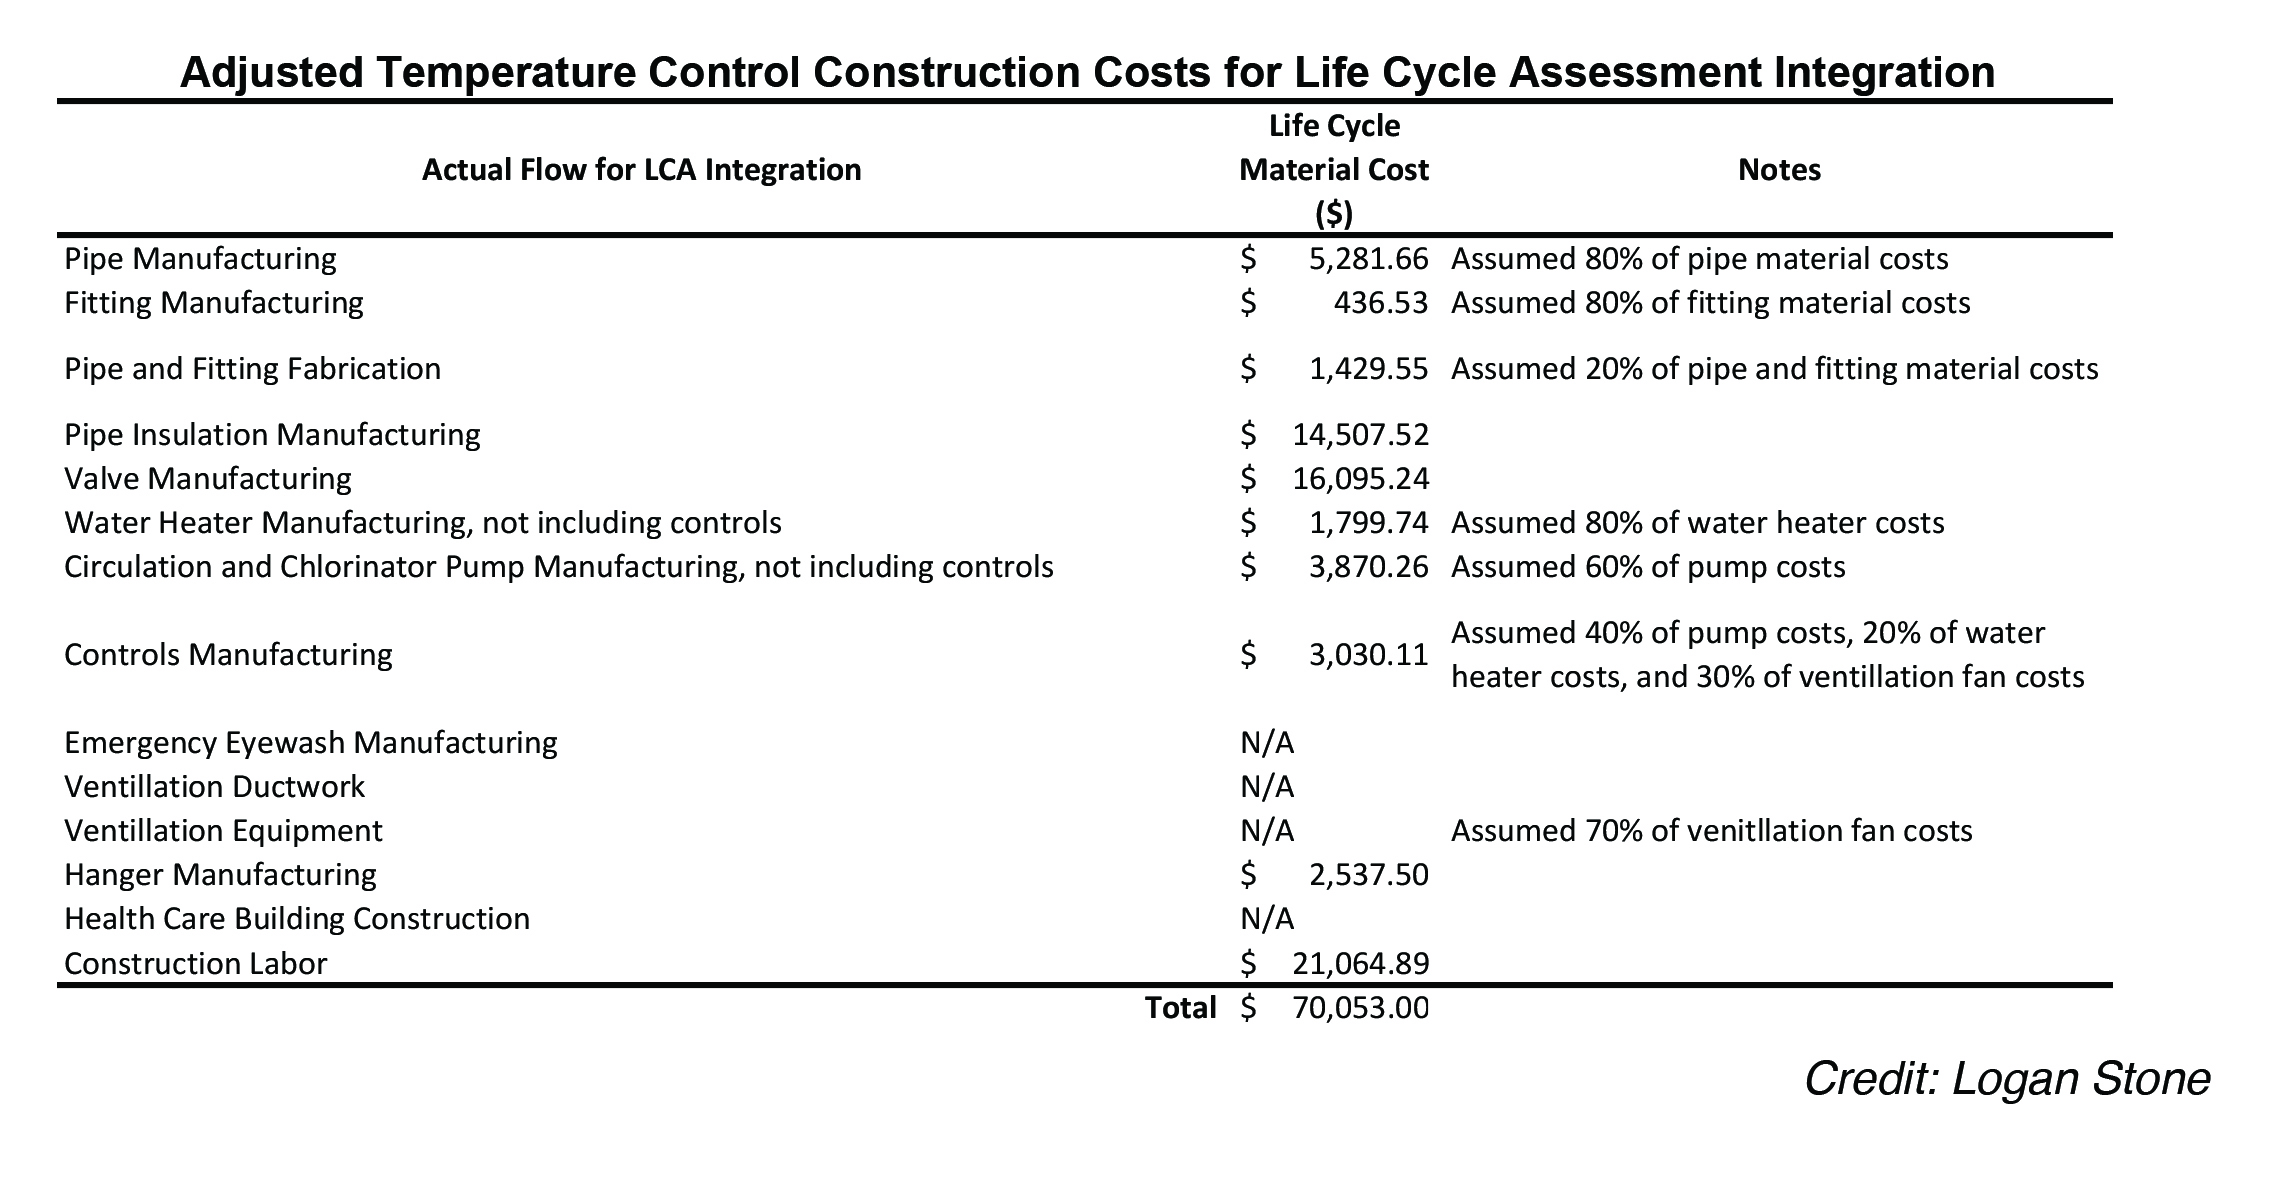 PE0322_Fig3-Adjusted Temperature Control Construction Costs for LCA Integration copy.jpg